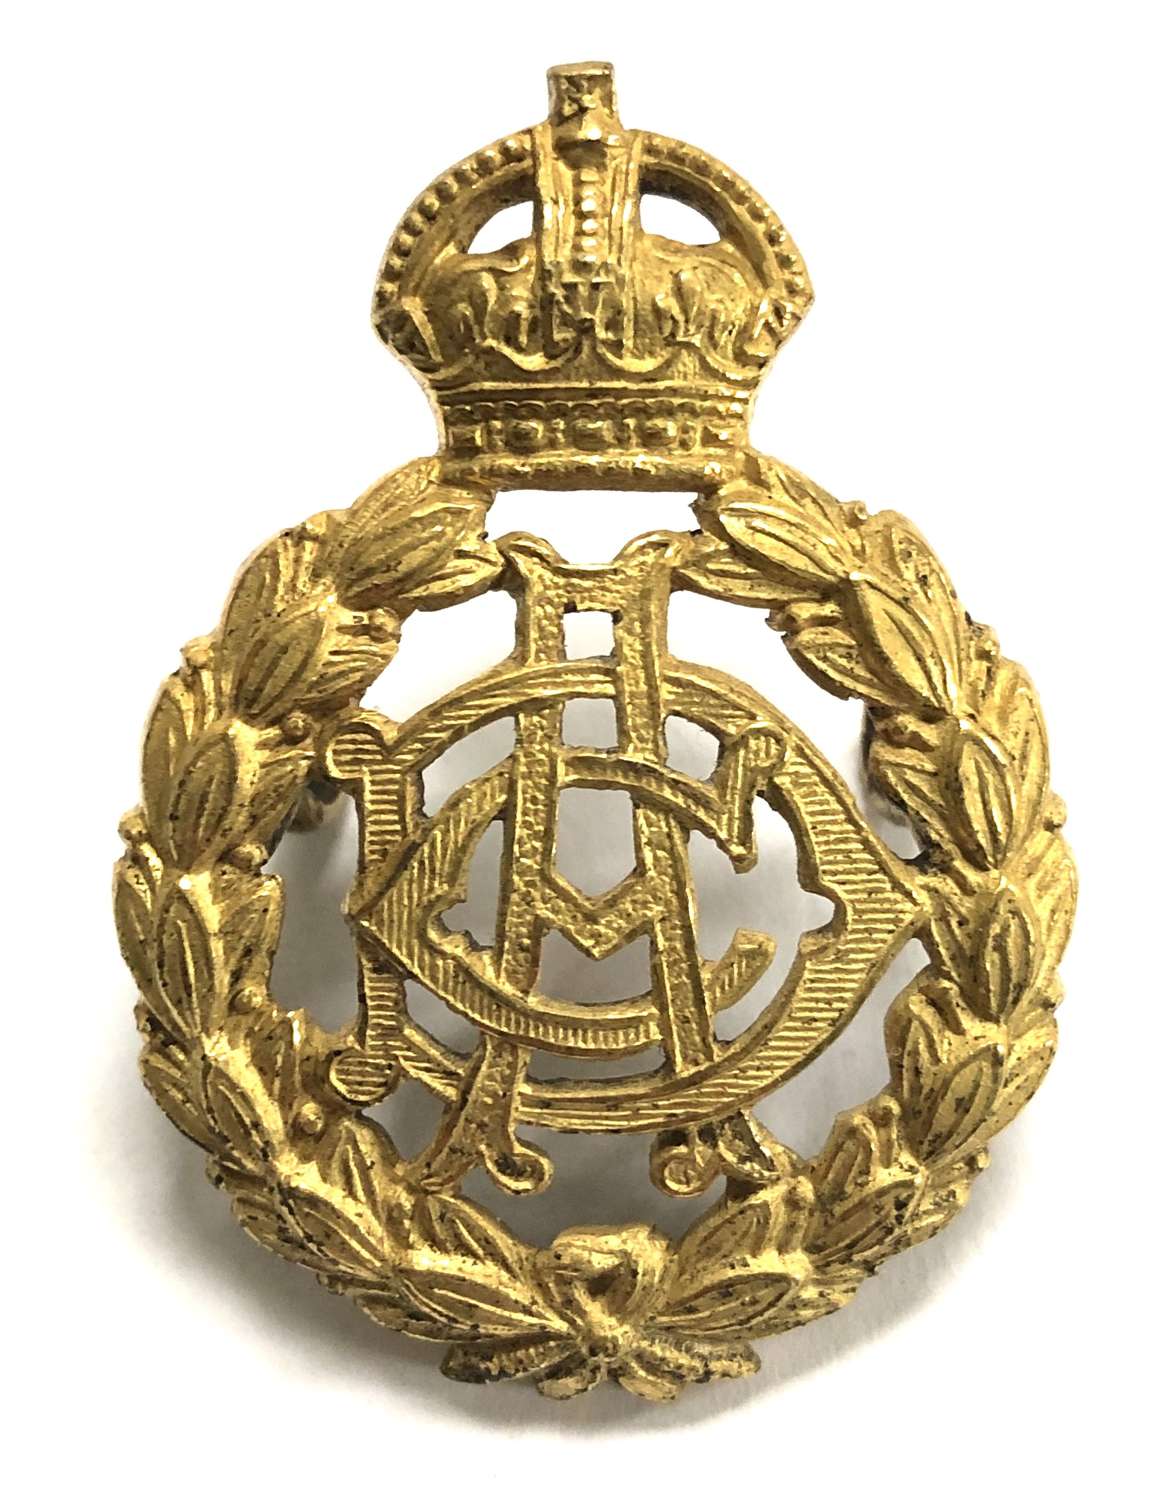 Army Dental Corps gilt Officer's cap badge by J & Co c1921-26